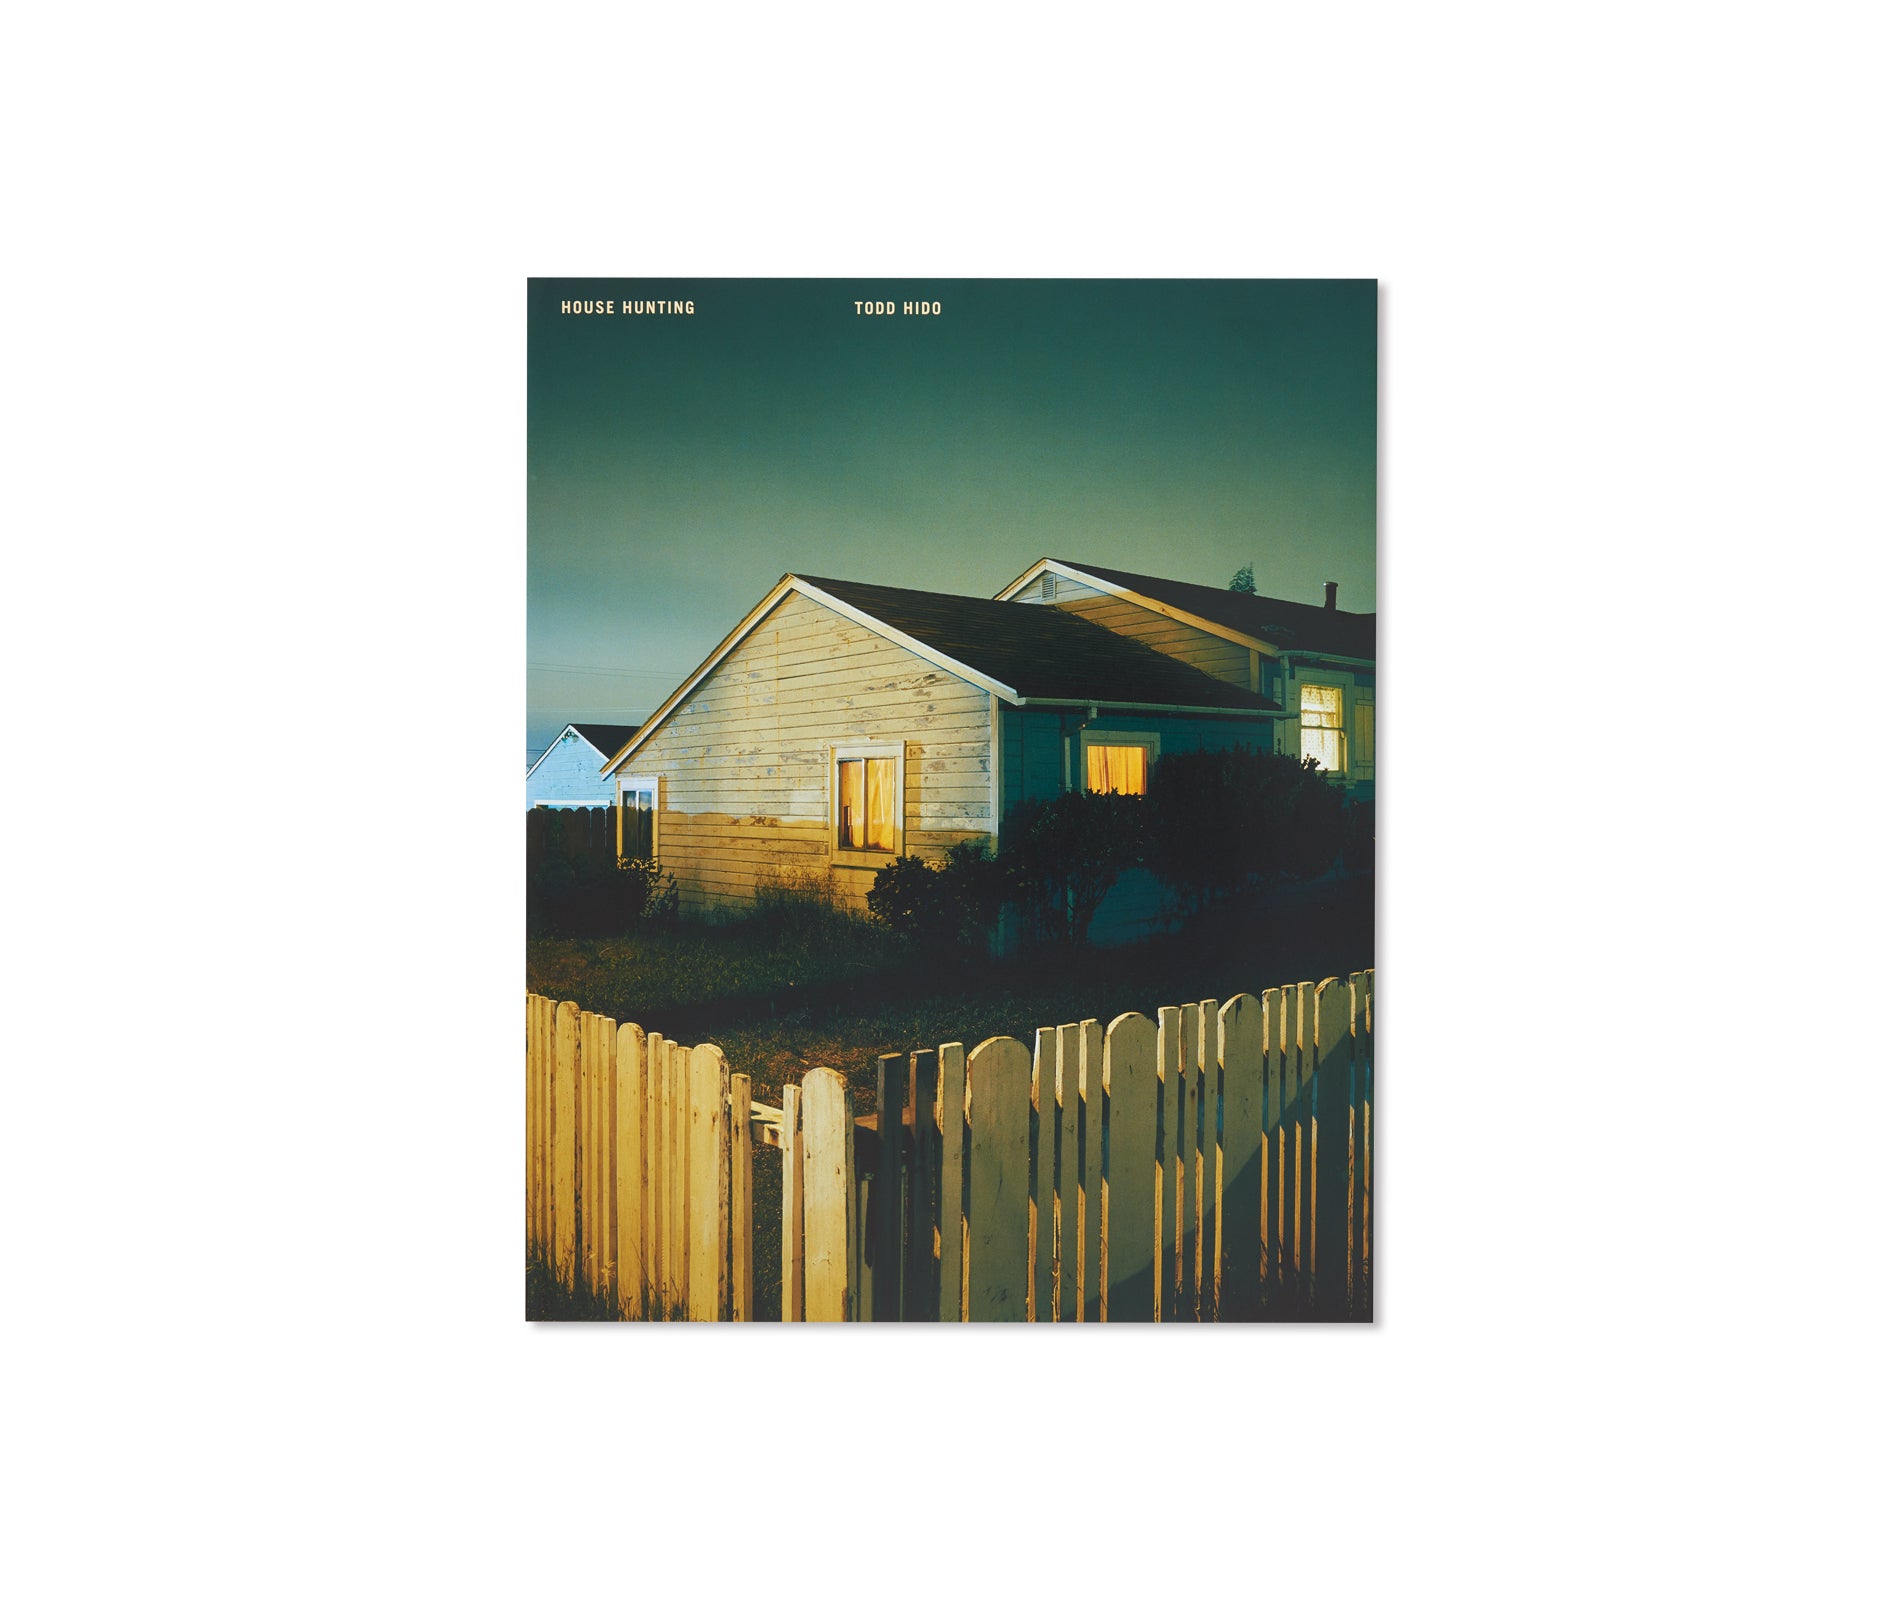 HOUSE HUNTING by Todd Hido [DELUXE EDITION] – twelvebooks